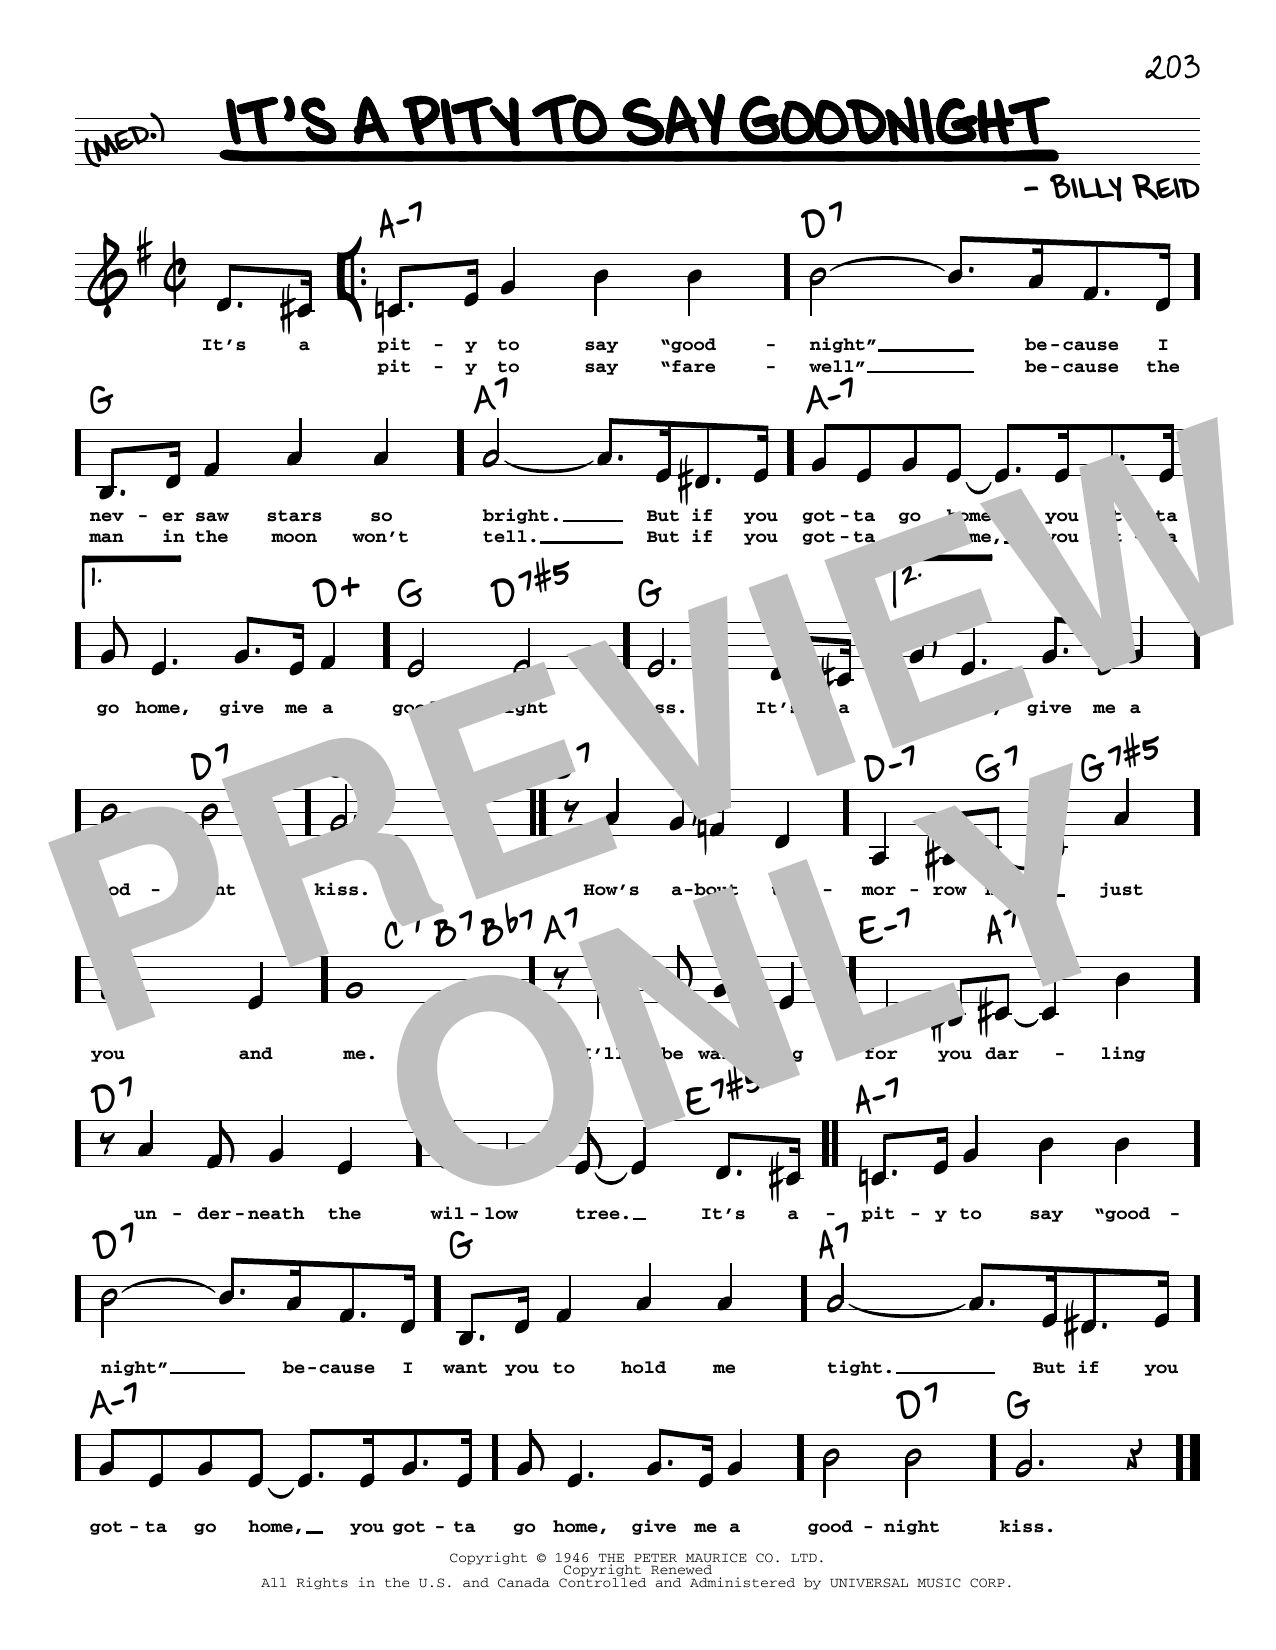 Ella Fitzgerald It's A Pity To Say Goodnight (Low Voice) sheet music notes printable PDF score